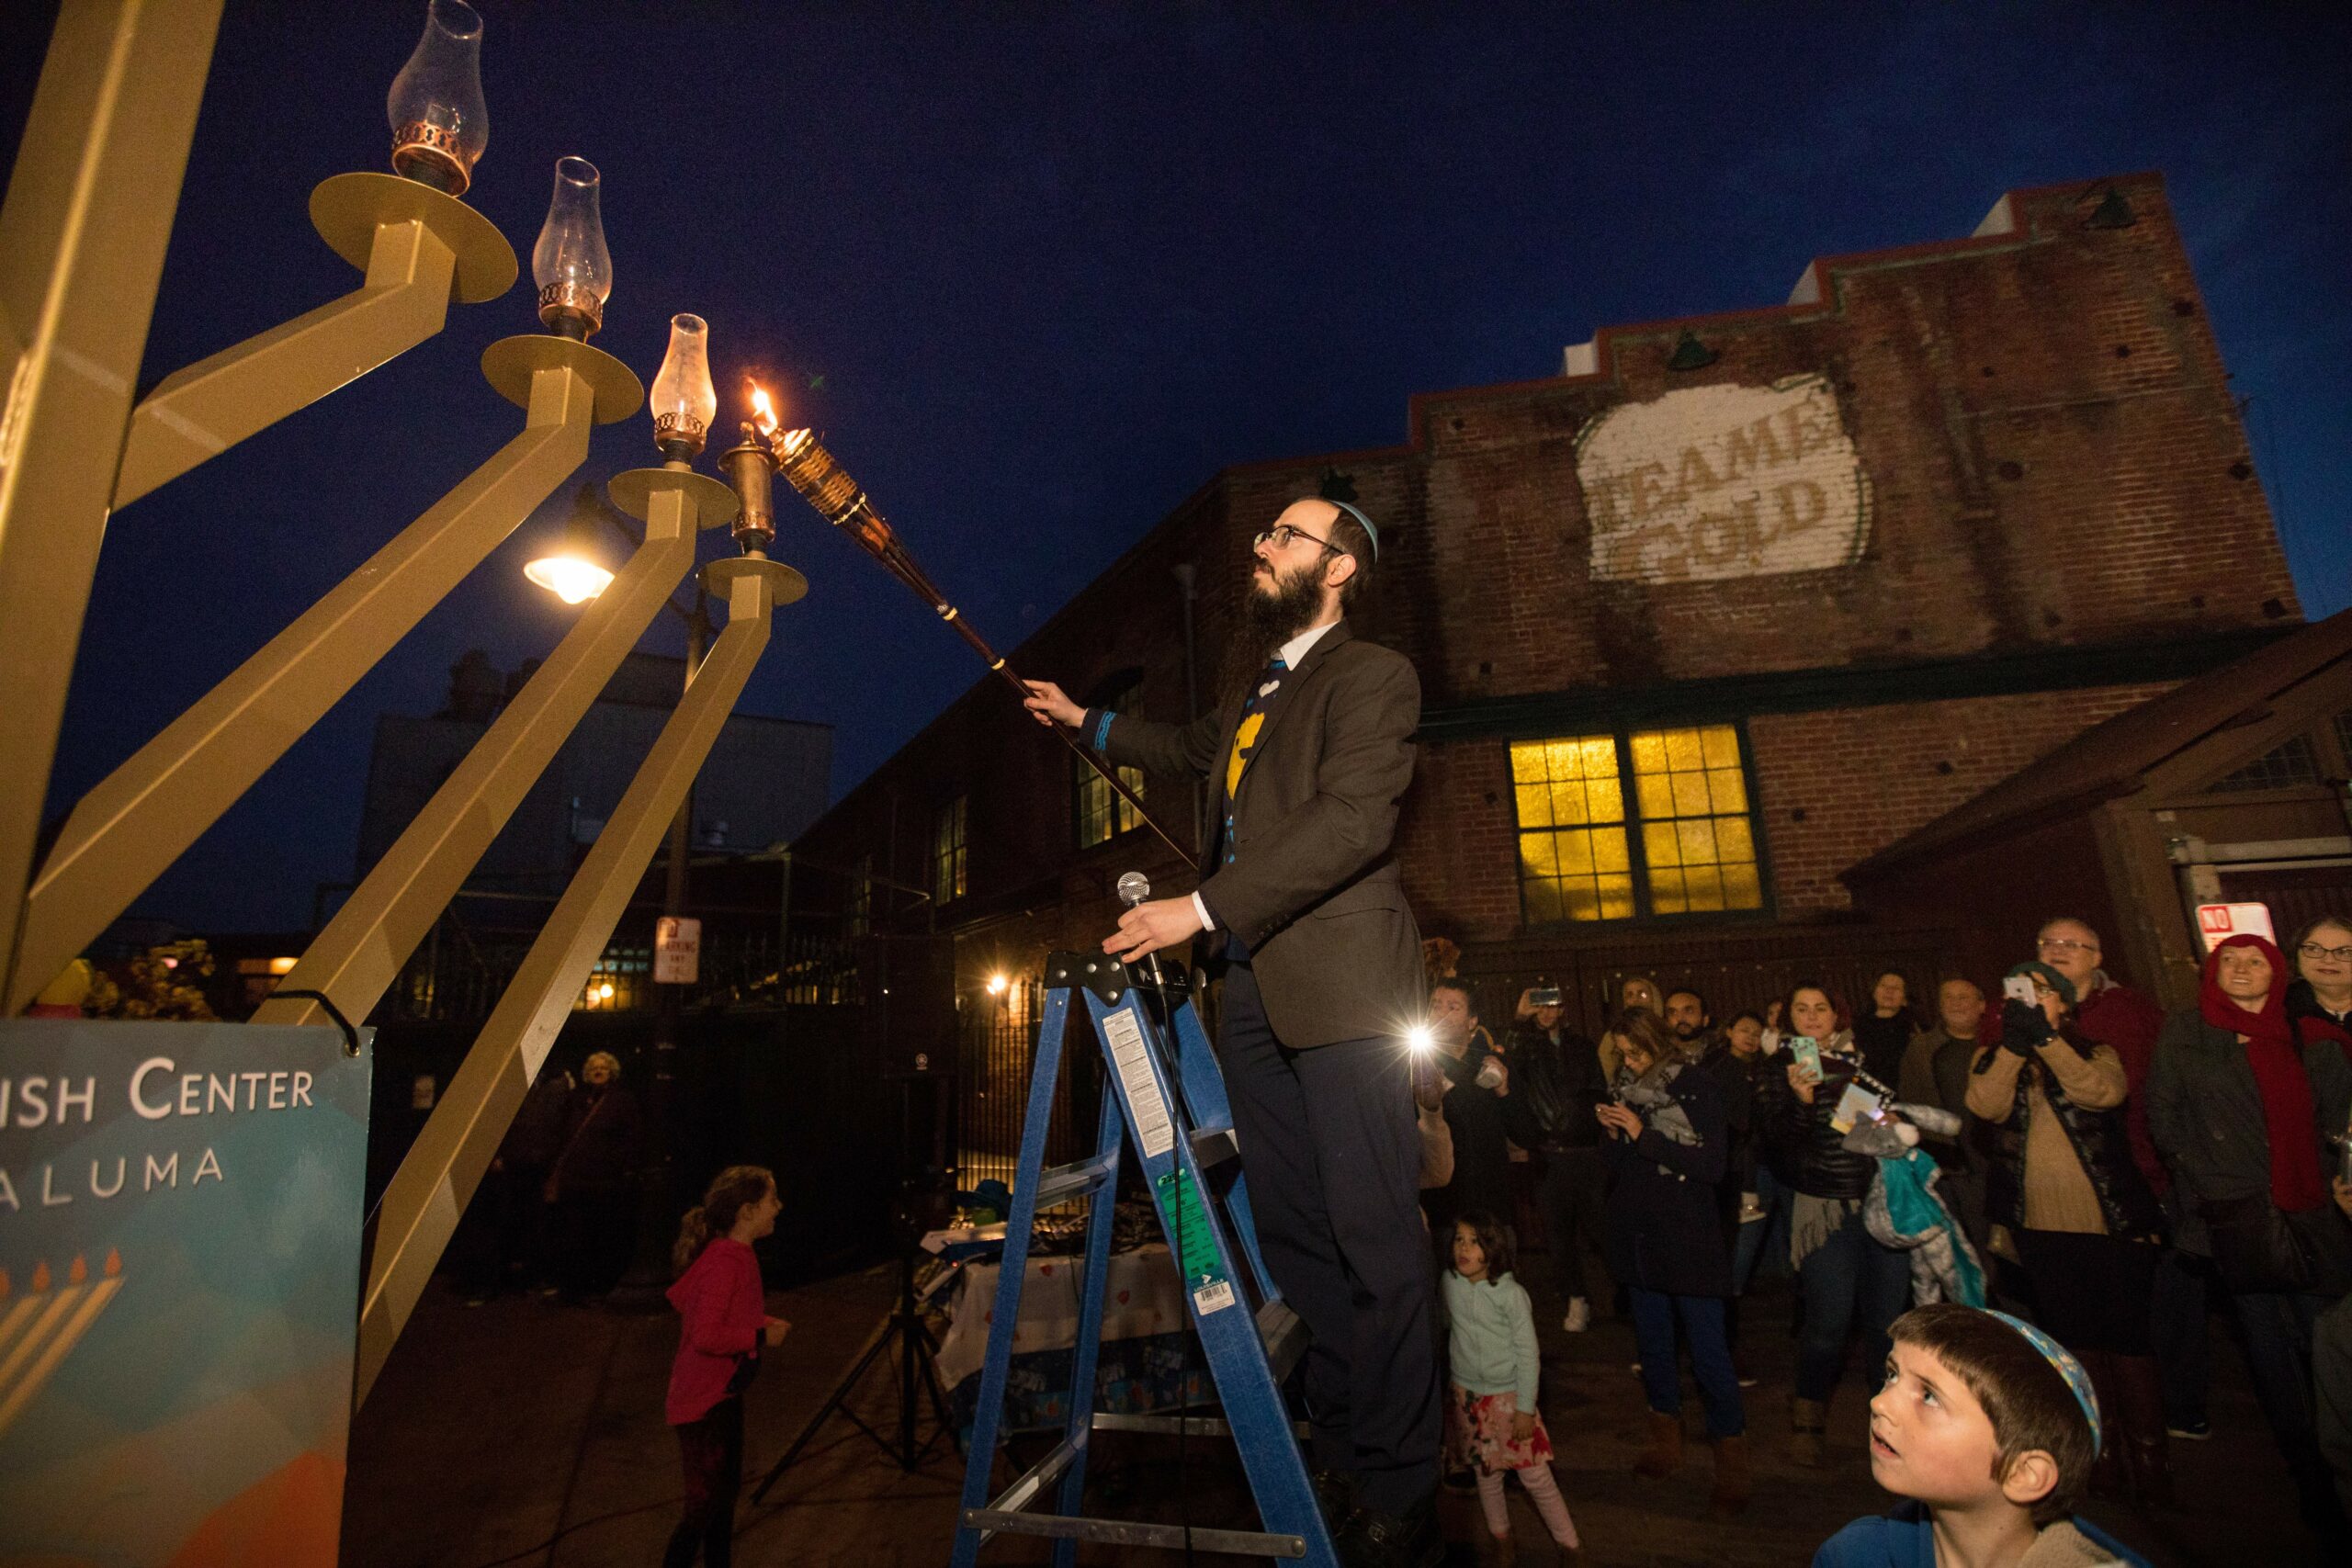 Rabbi Dovid Bush, of Chabad Jewish Center, lights the first candle of the Grand Menorah, at the 5th Annual Chanukah at the River celebration presented by Chabad Jewish Center on Sunday, December 22, 2019, in Petaluma, California. (Photo by Darryl Bush / For The Press Democrat)